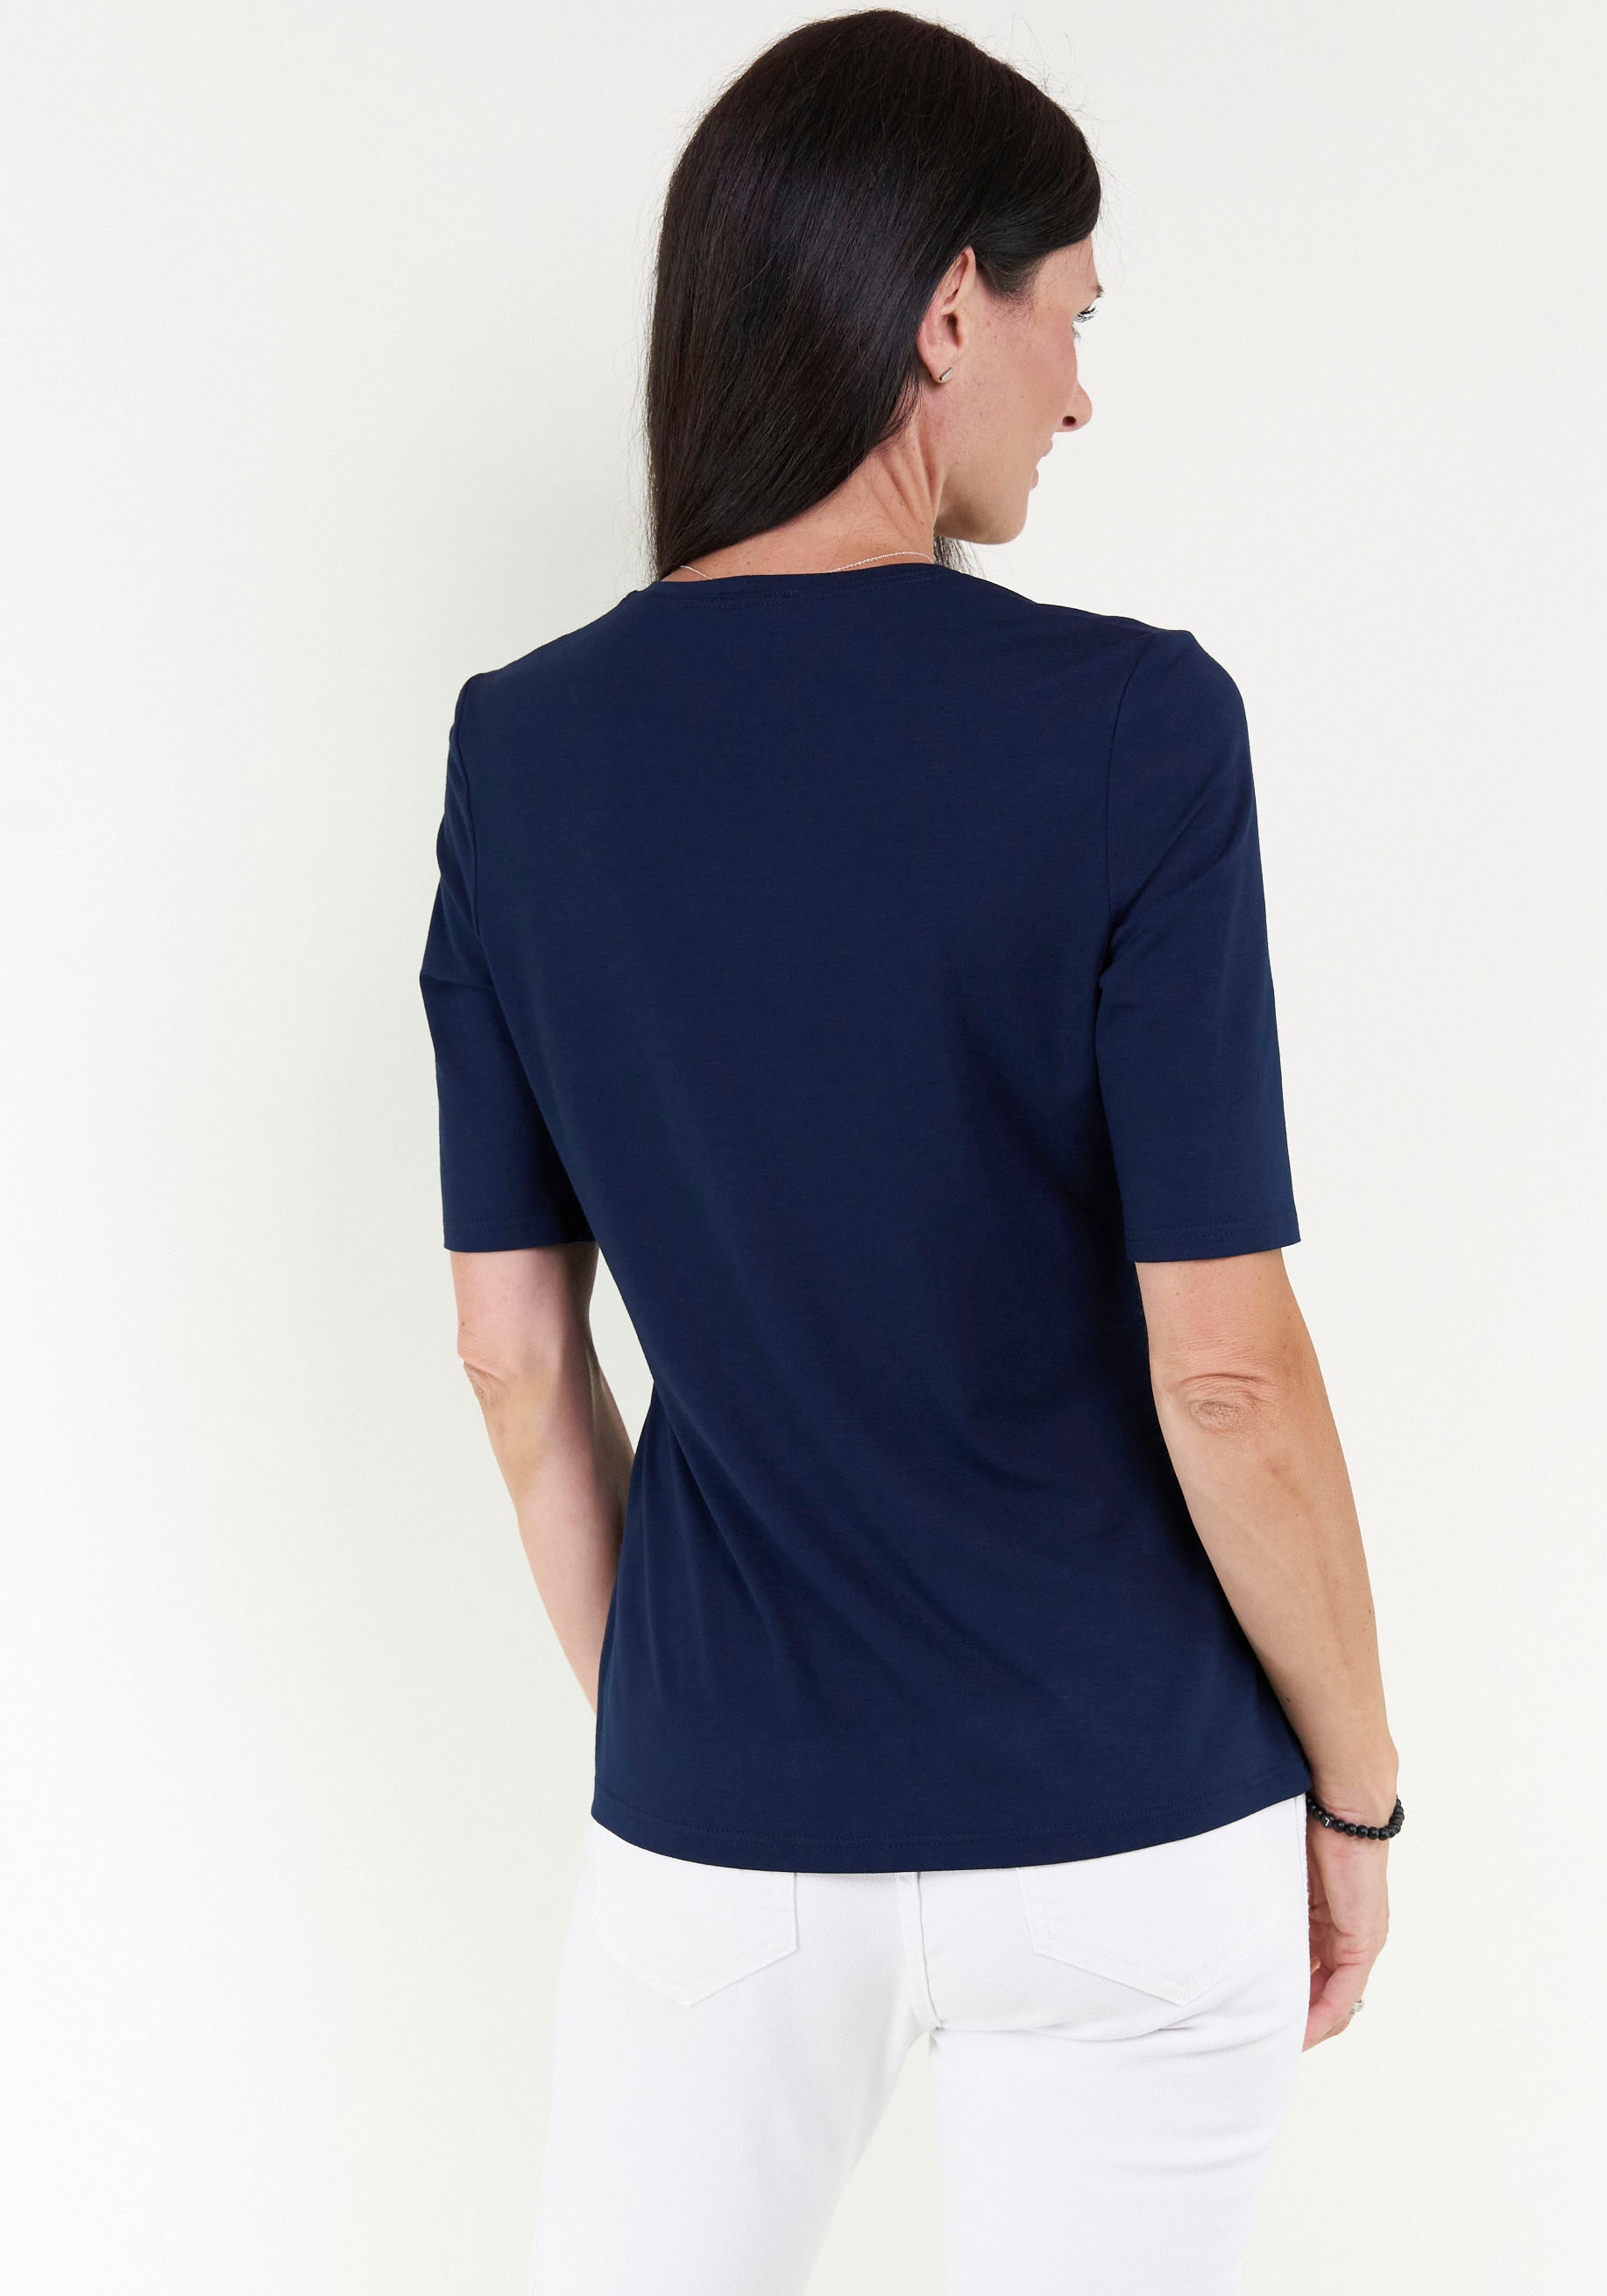 Seidel Moden V-Shirt, mit Halbarm aus softem Material, MADE IN GERMANY bei  OTTOversand | T-Shirts